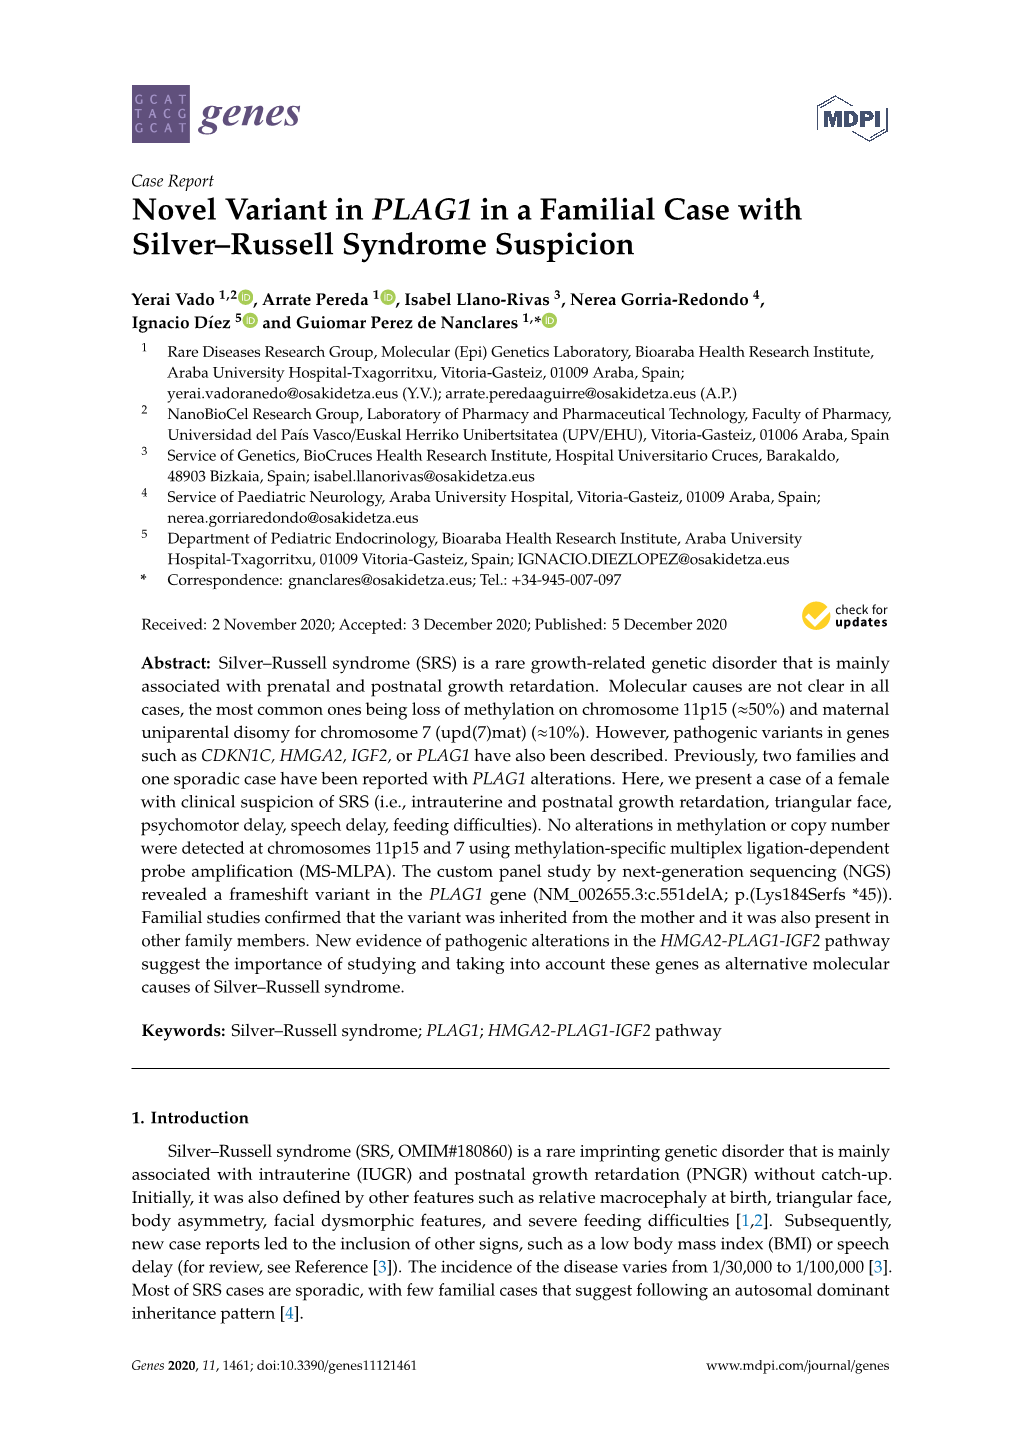 Novel Variant in PLAG1 in a Familial Case with Silver–Russell Syndrome Suspicion